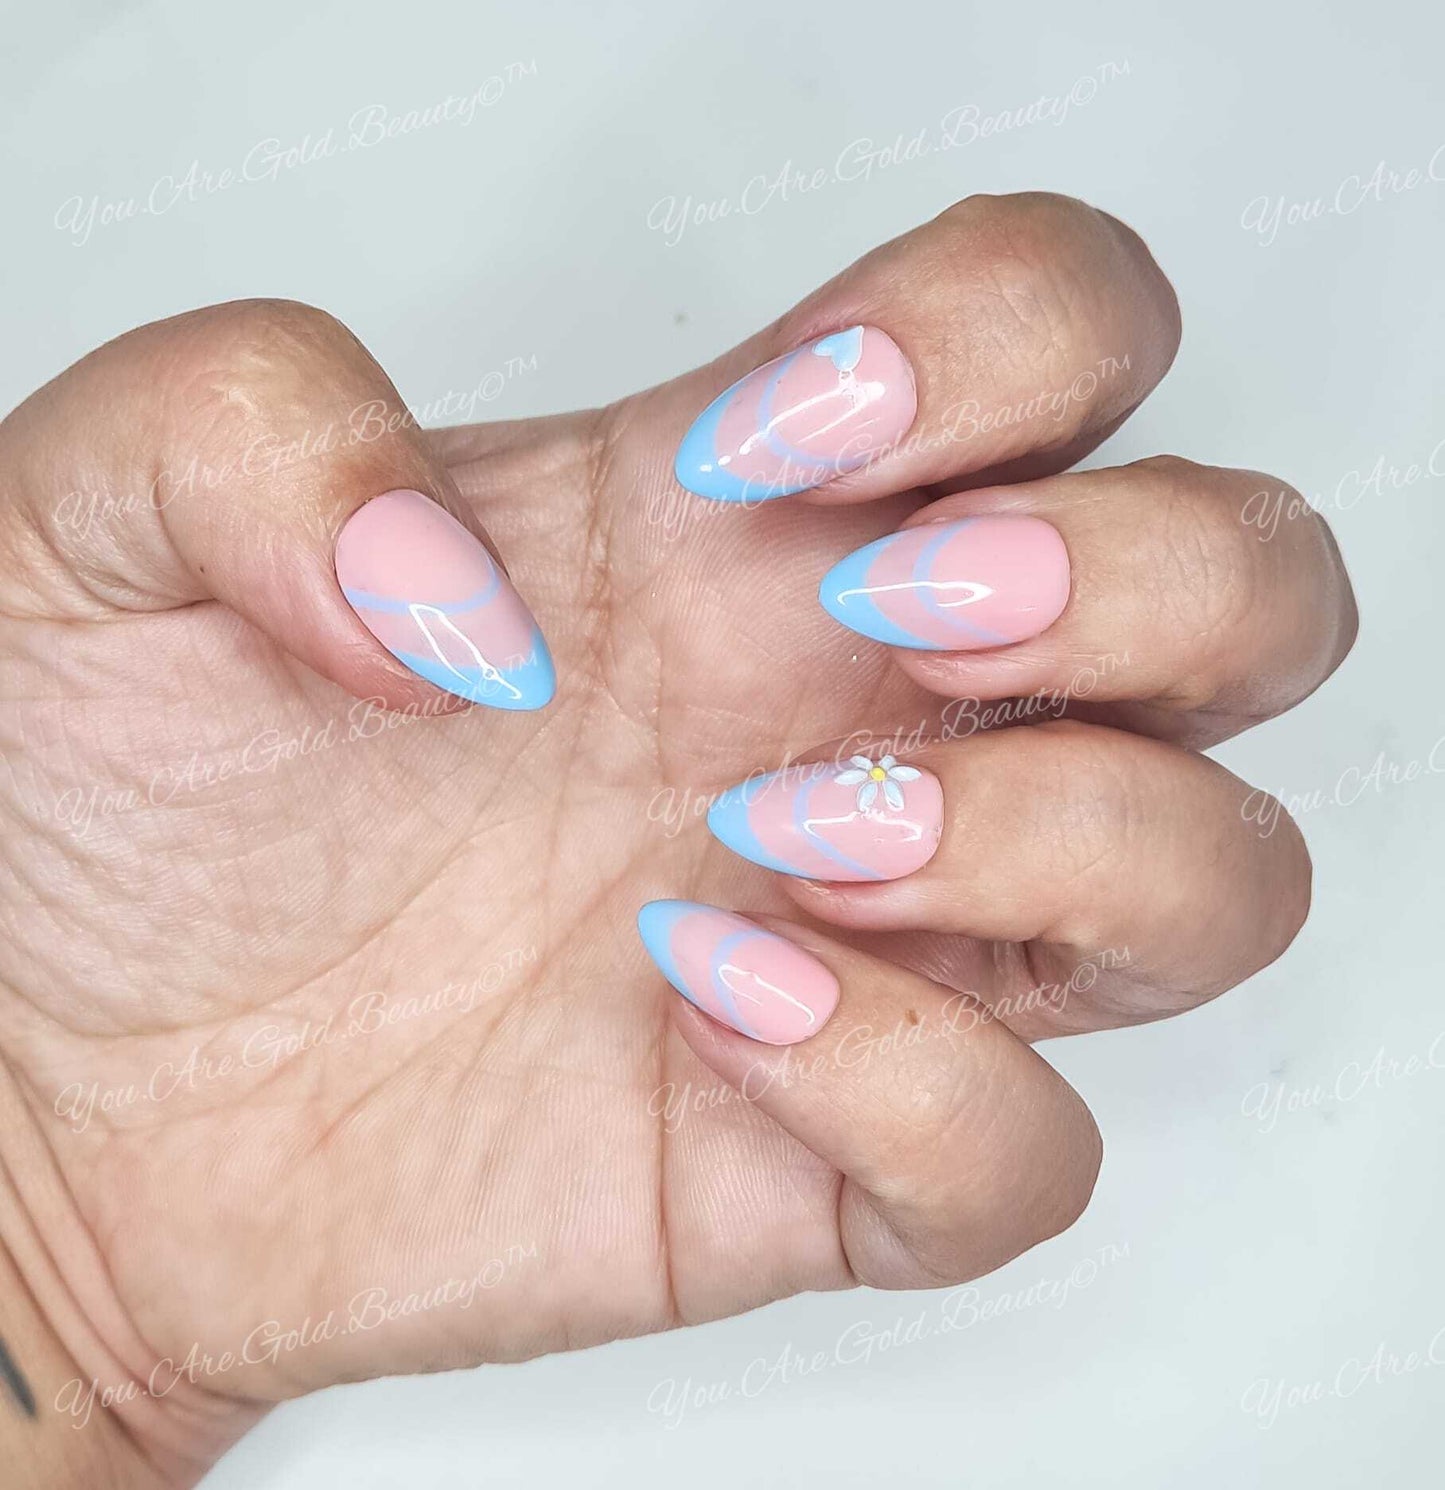 Luxury Press On nails UK, false nails almond nails shape with blue french tip design and flower